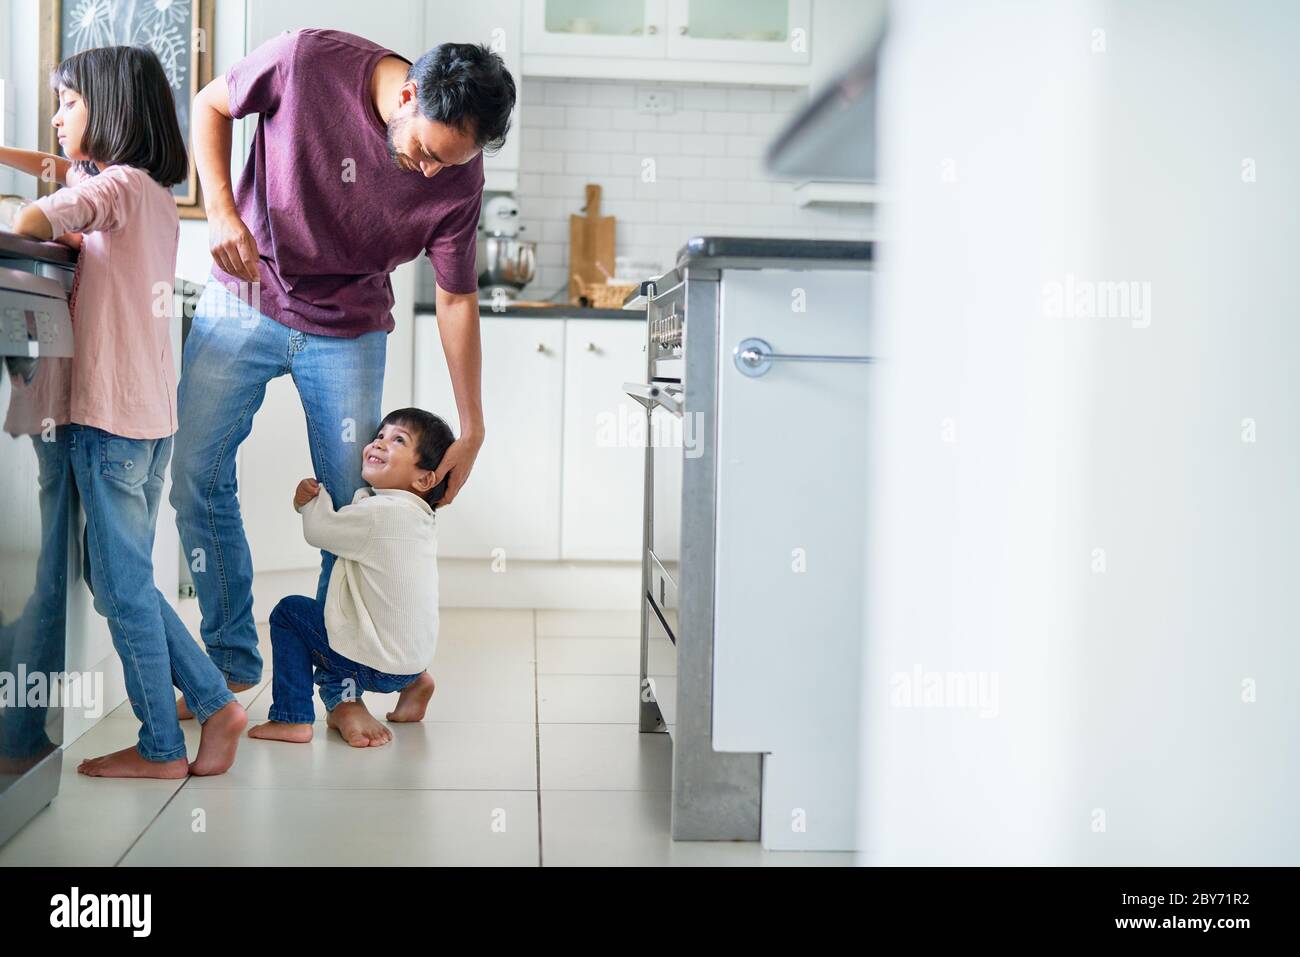 Affectionate boy hugging leg of father in kitchen Stock Photo